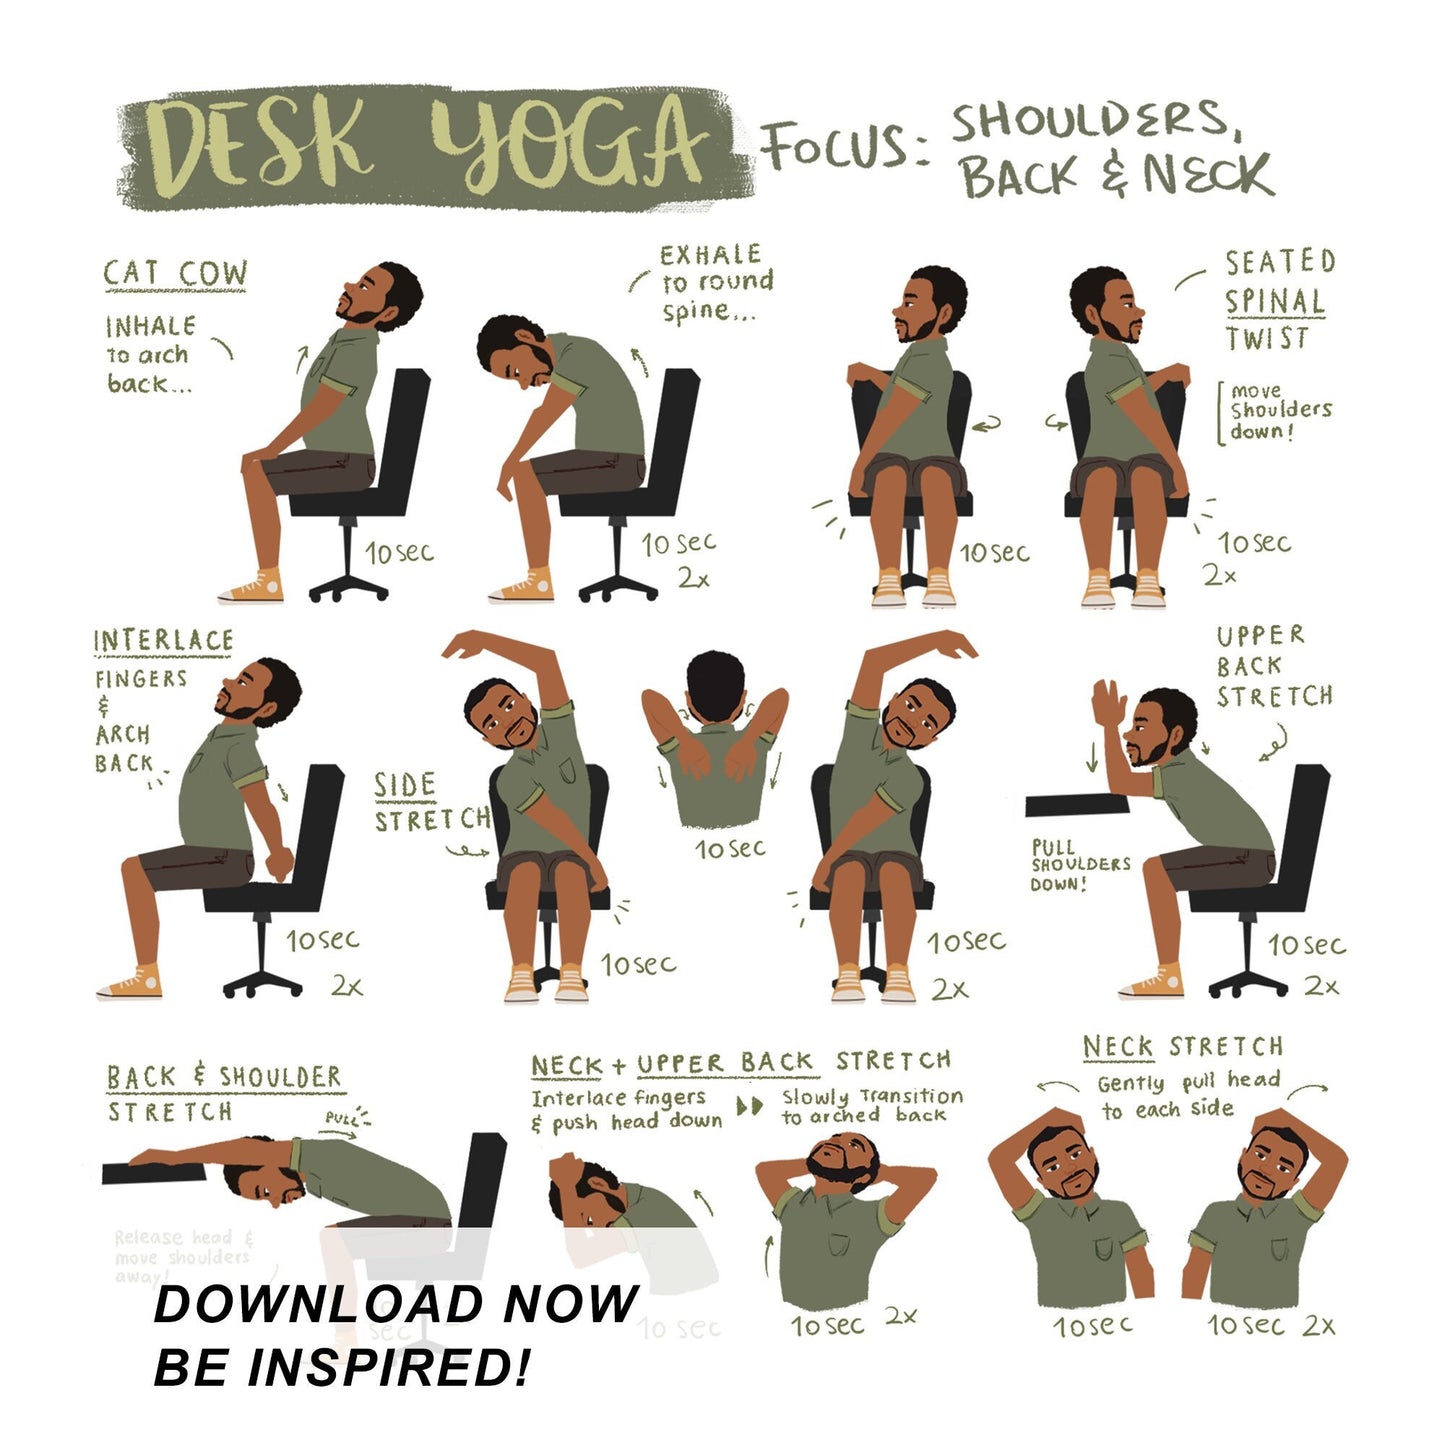 Desk Yoga - focus on shoulders, back, and neck | Chair Yoga | Office Yoga | Yoga Poses | Work From Home Yoga | 8x8 in, 8.5x11 in, 16x16 in